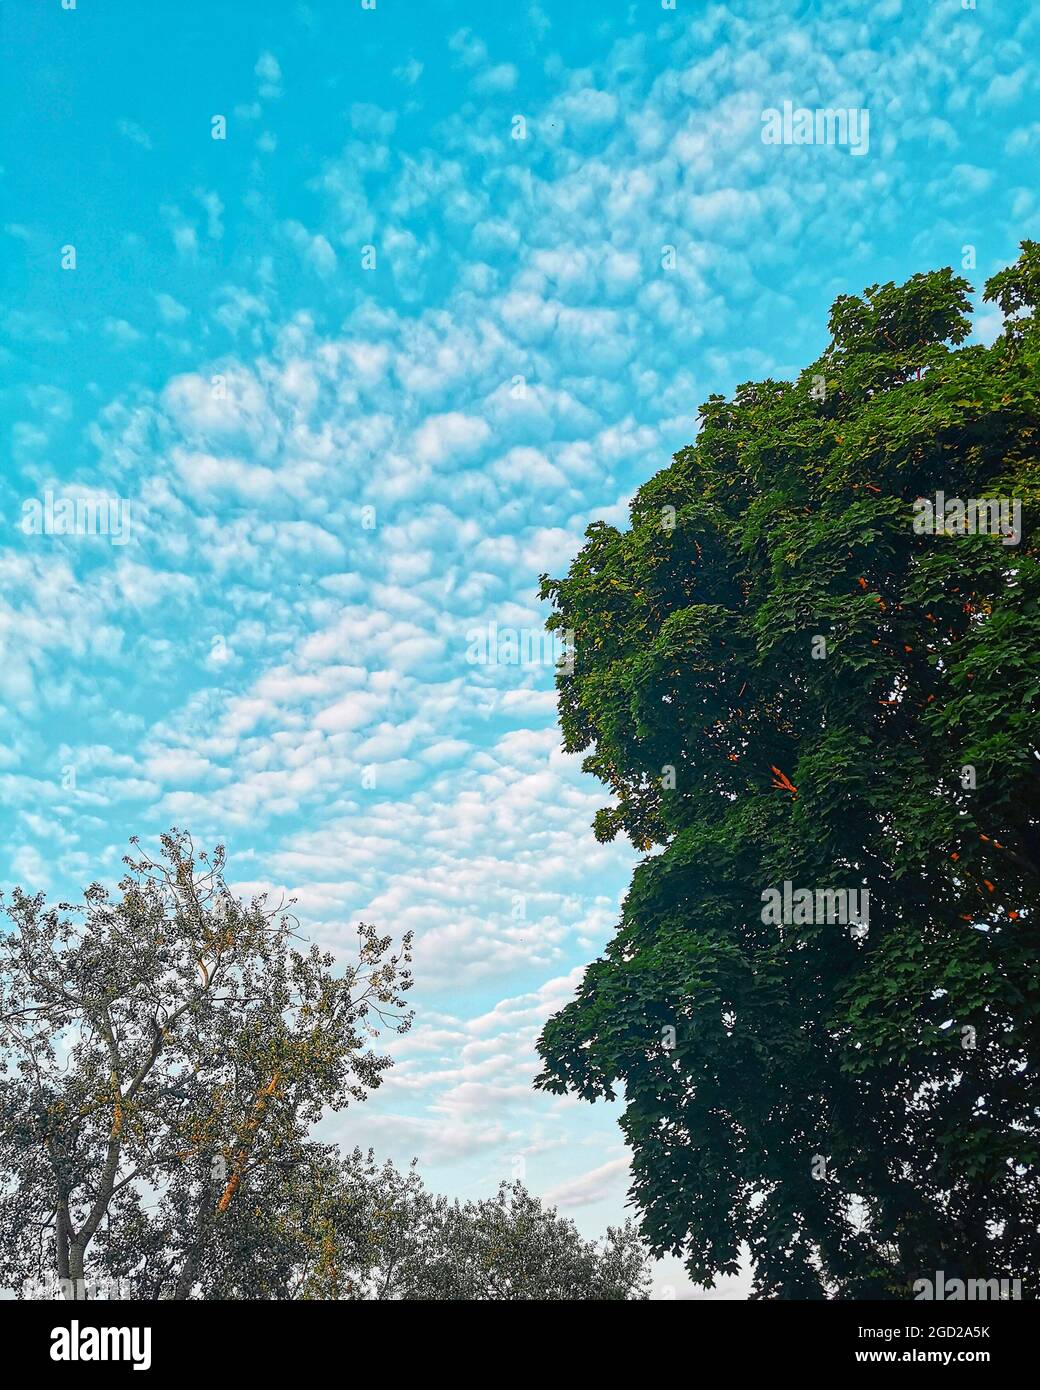 Blue sky and green tree branches in summer time. Trees pulling their green arms to the sun light. Looking up toward trees and blue sky Stock Photo